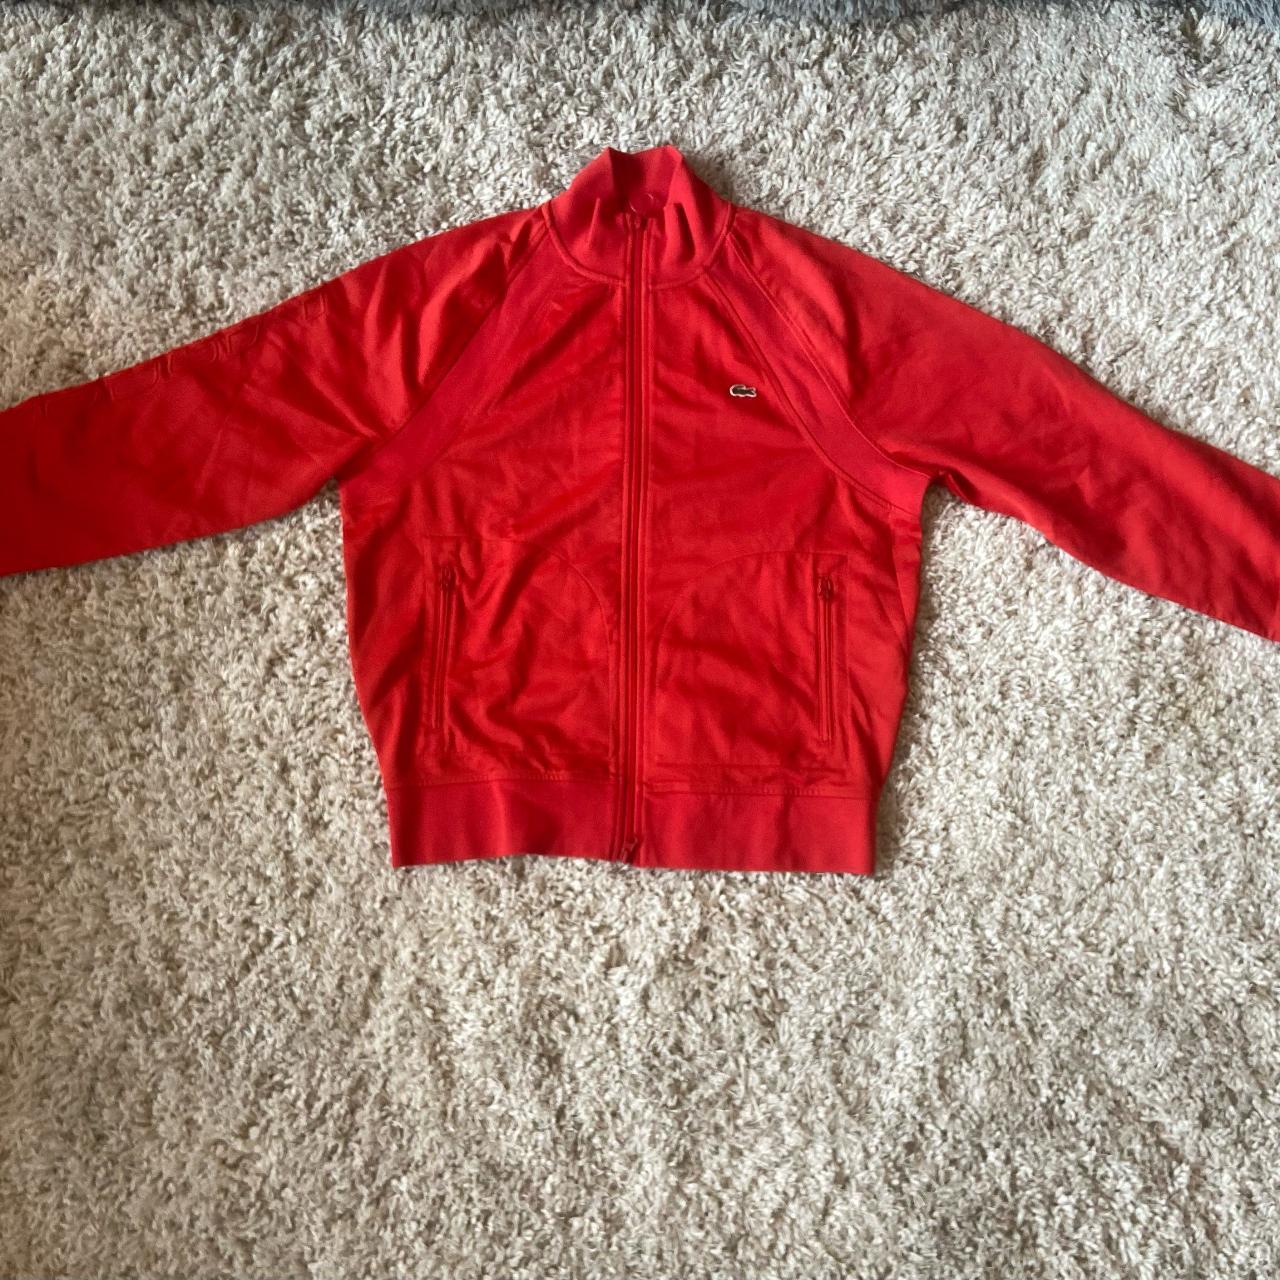 Lacoste Live Women's Red Jacket (2)